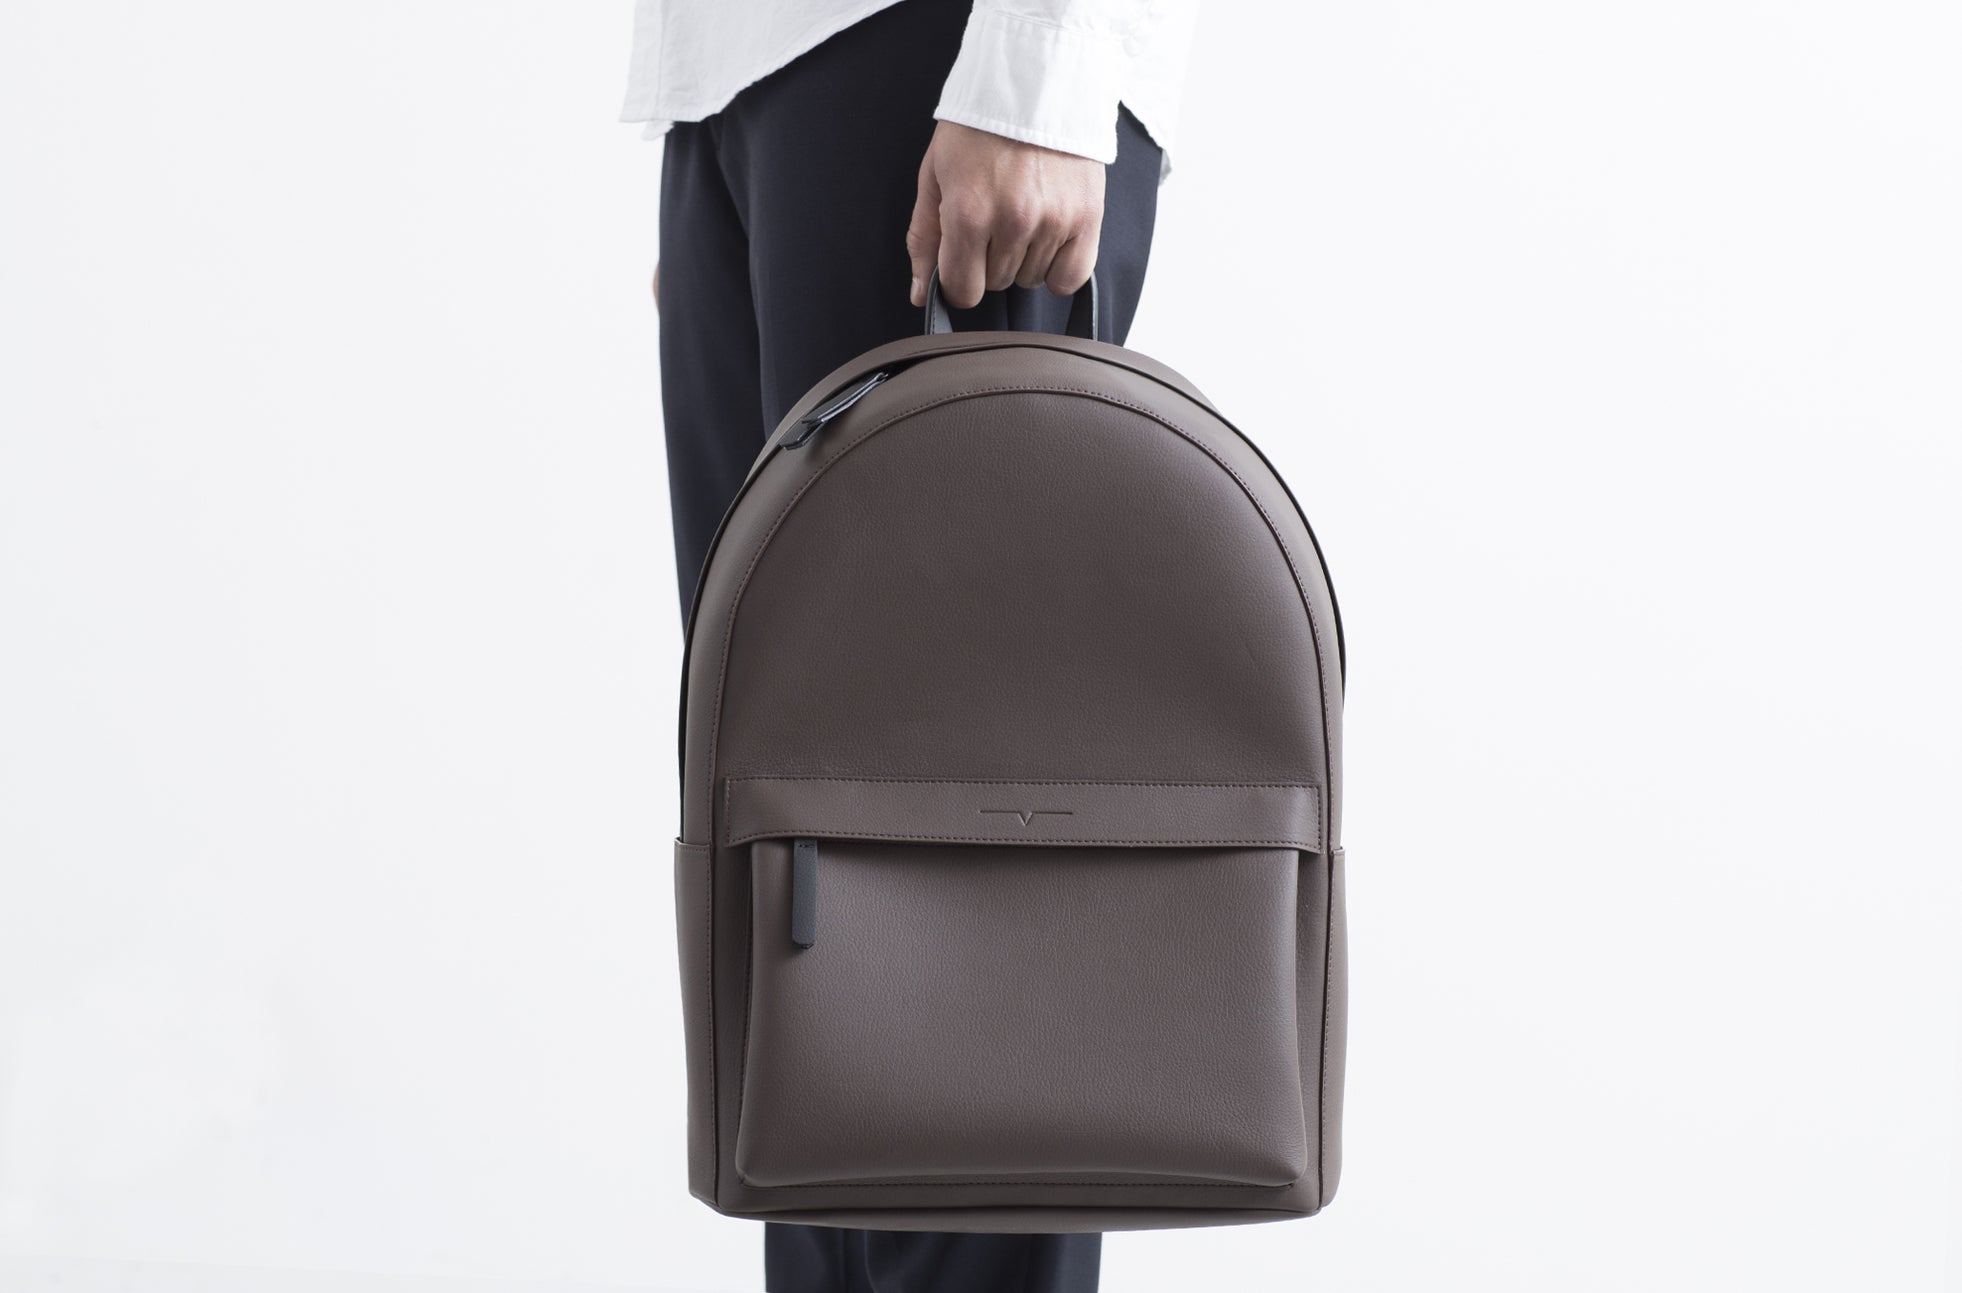 The Classic Backpack in Technik in Taupe and Black image 10